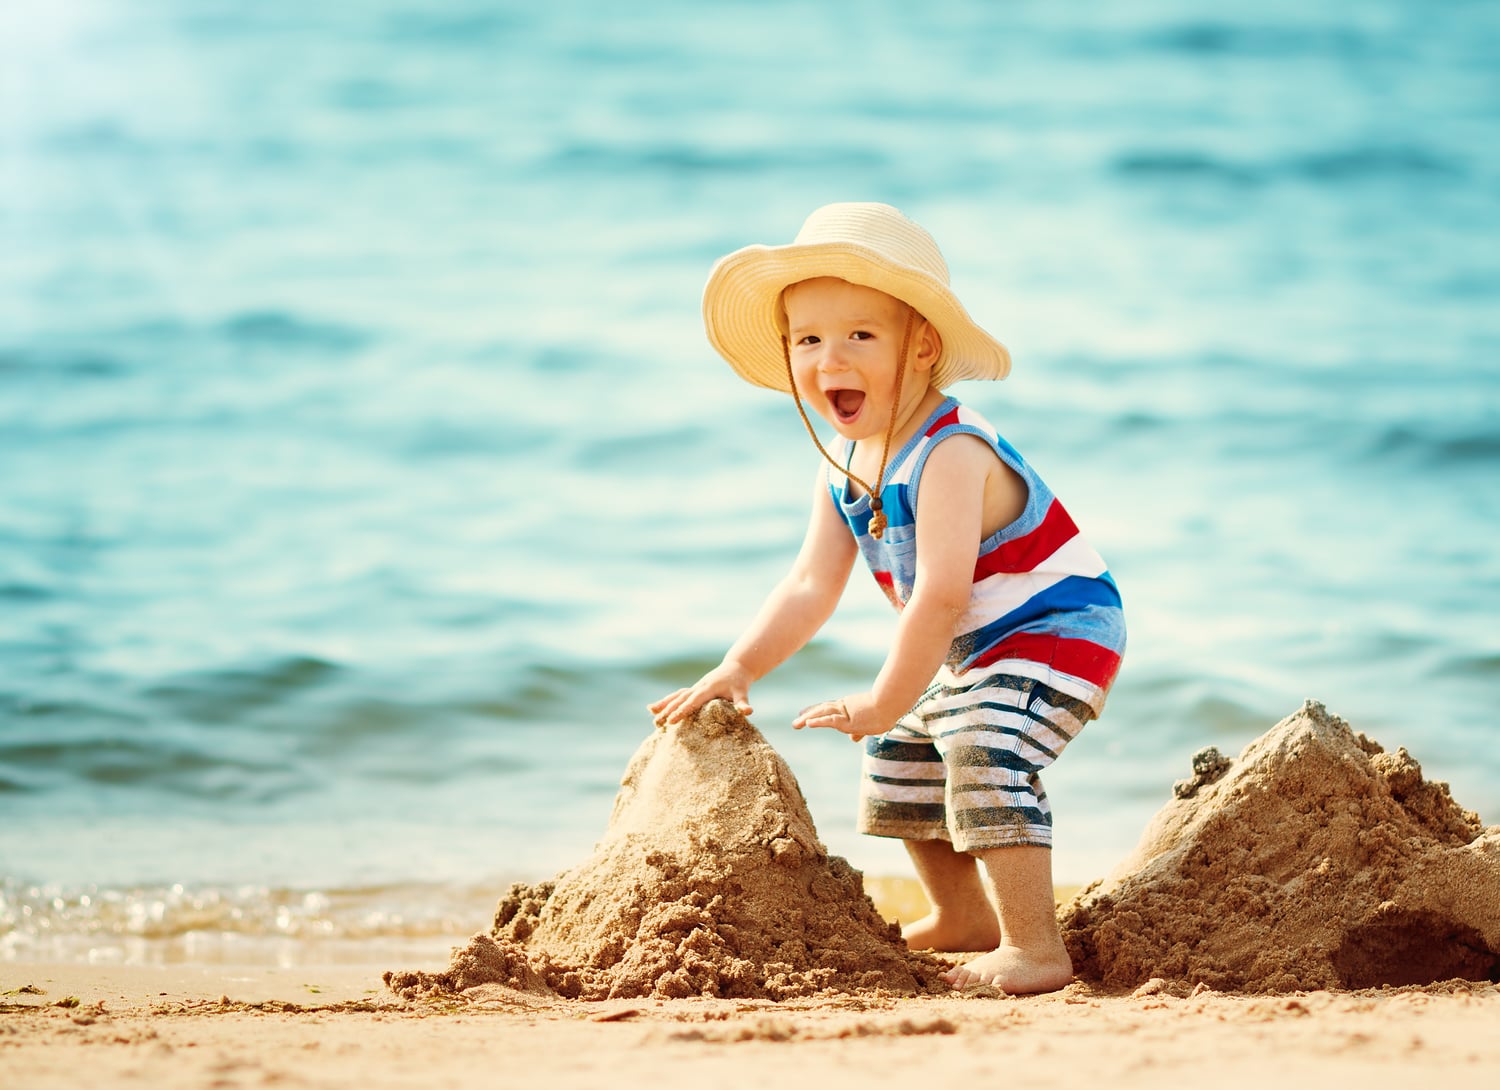 17 Things to Do at the Beach with Kids